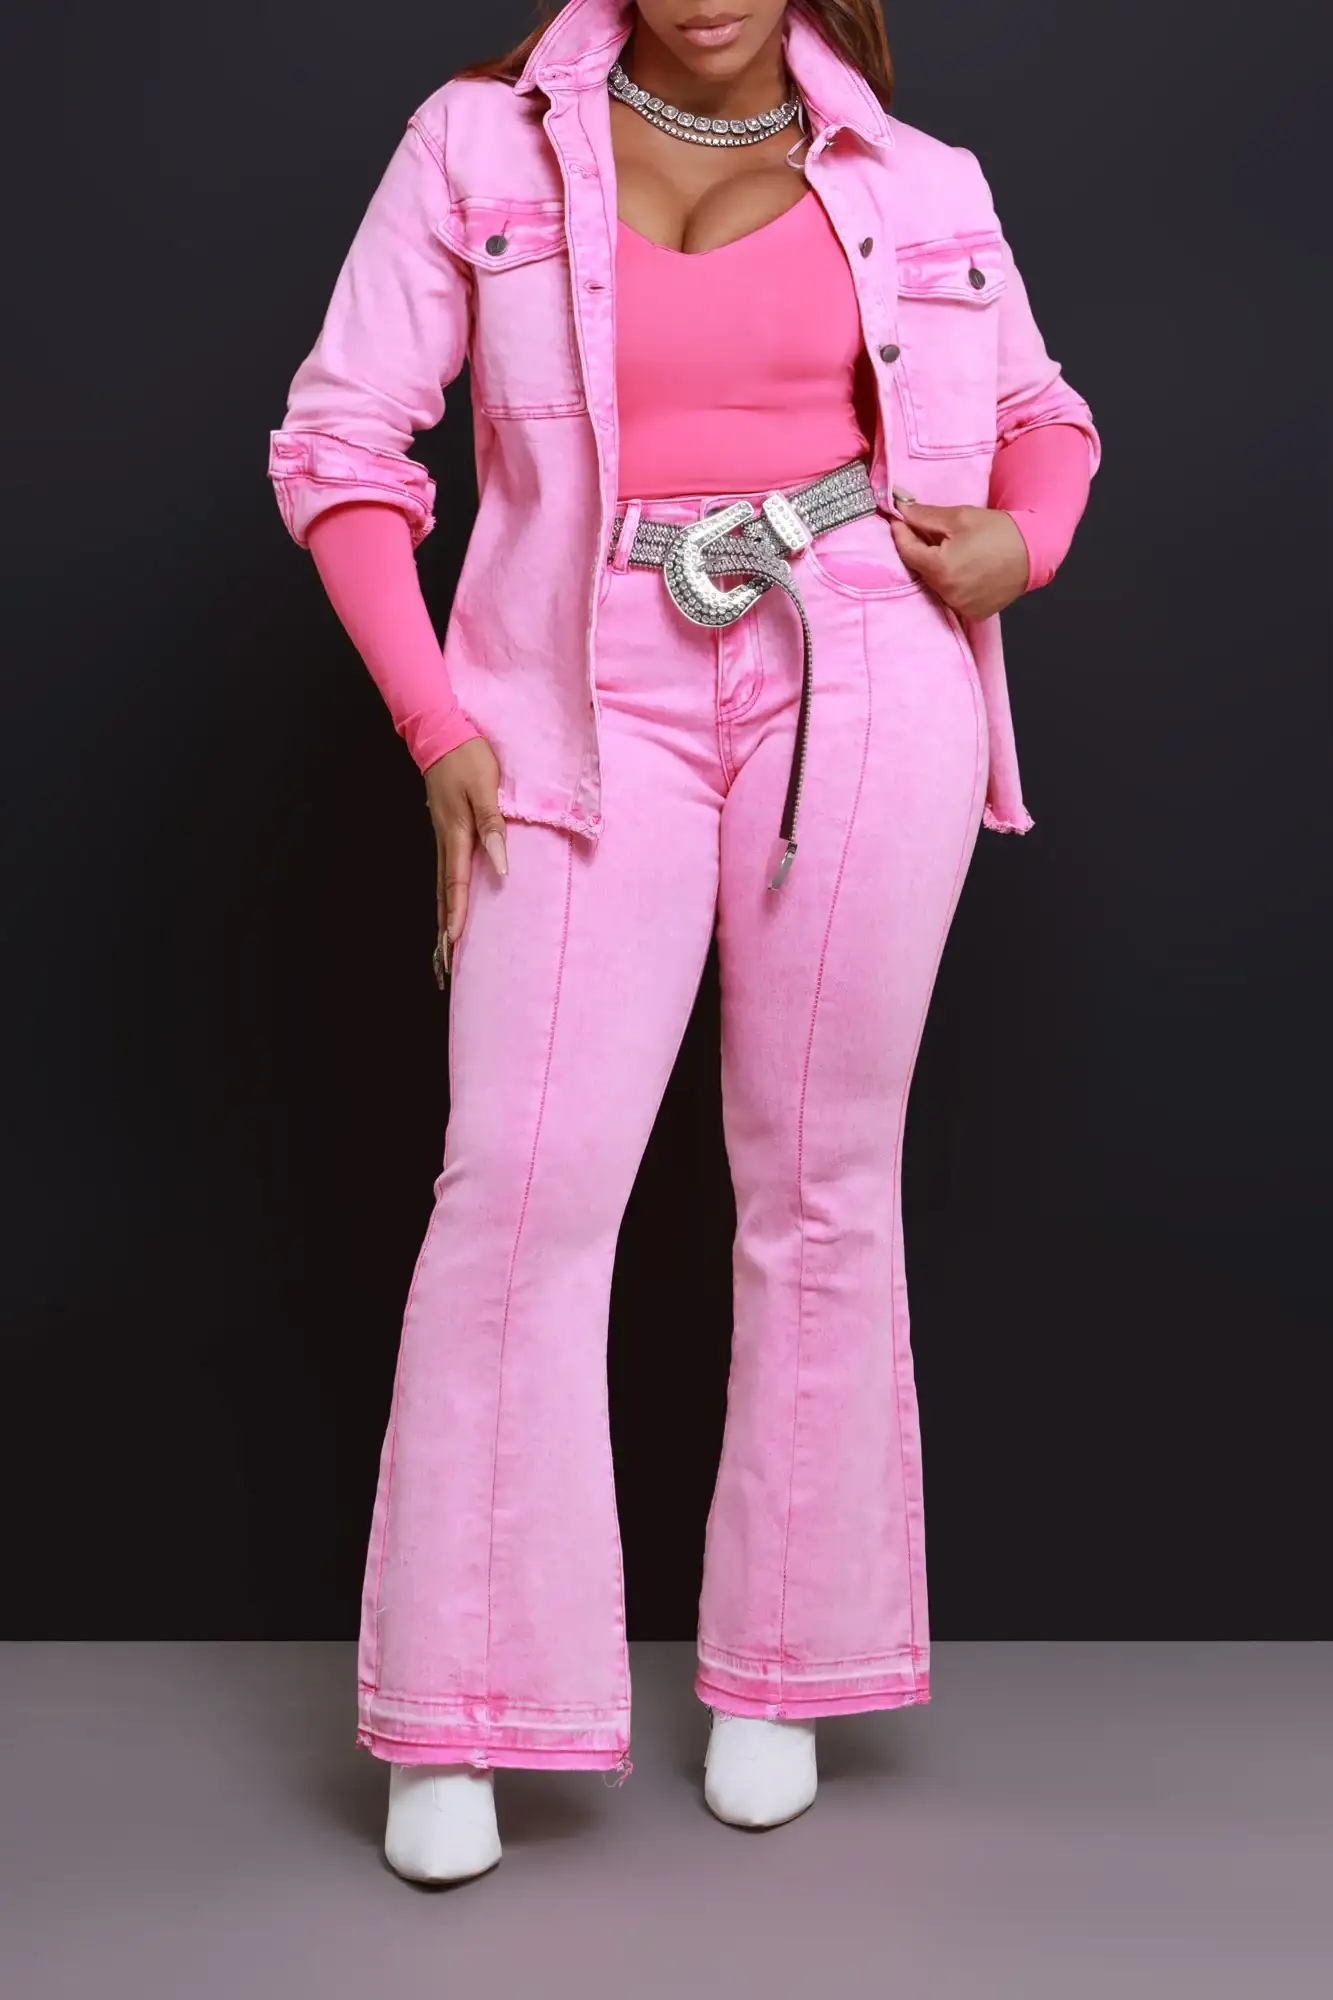 Image of Access Denied High Rise Flare Leg Jeans - Pink